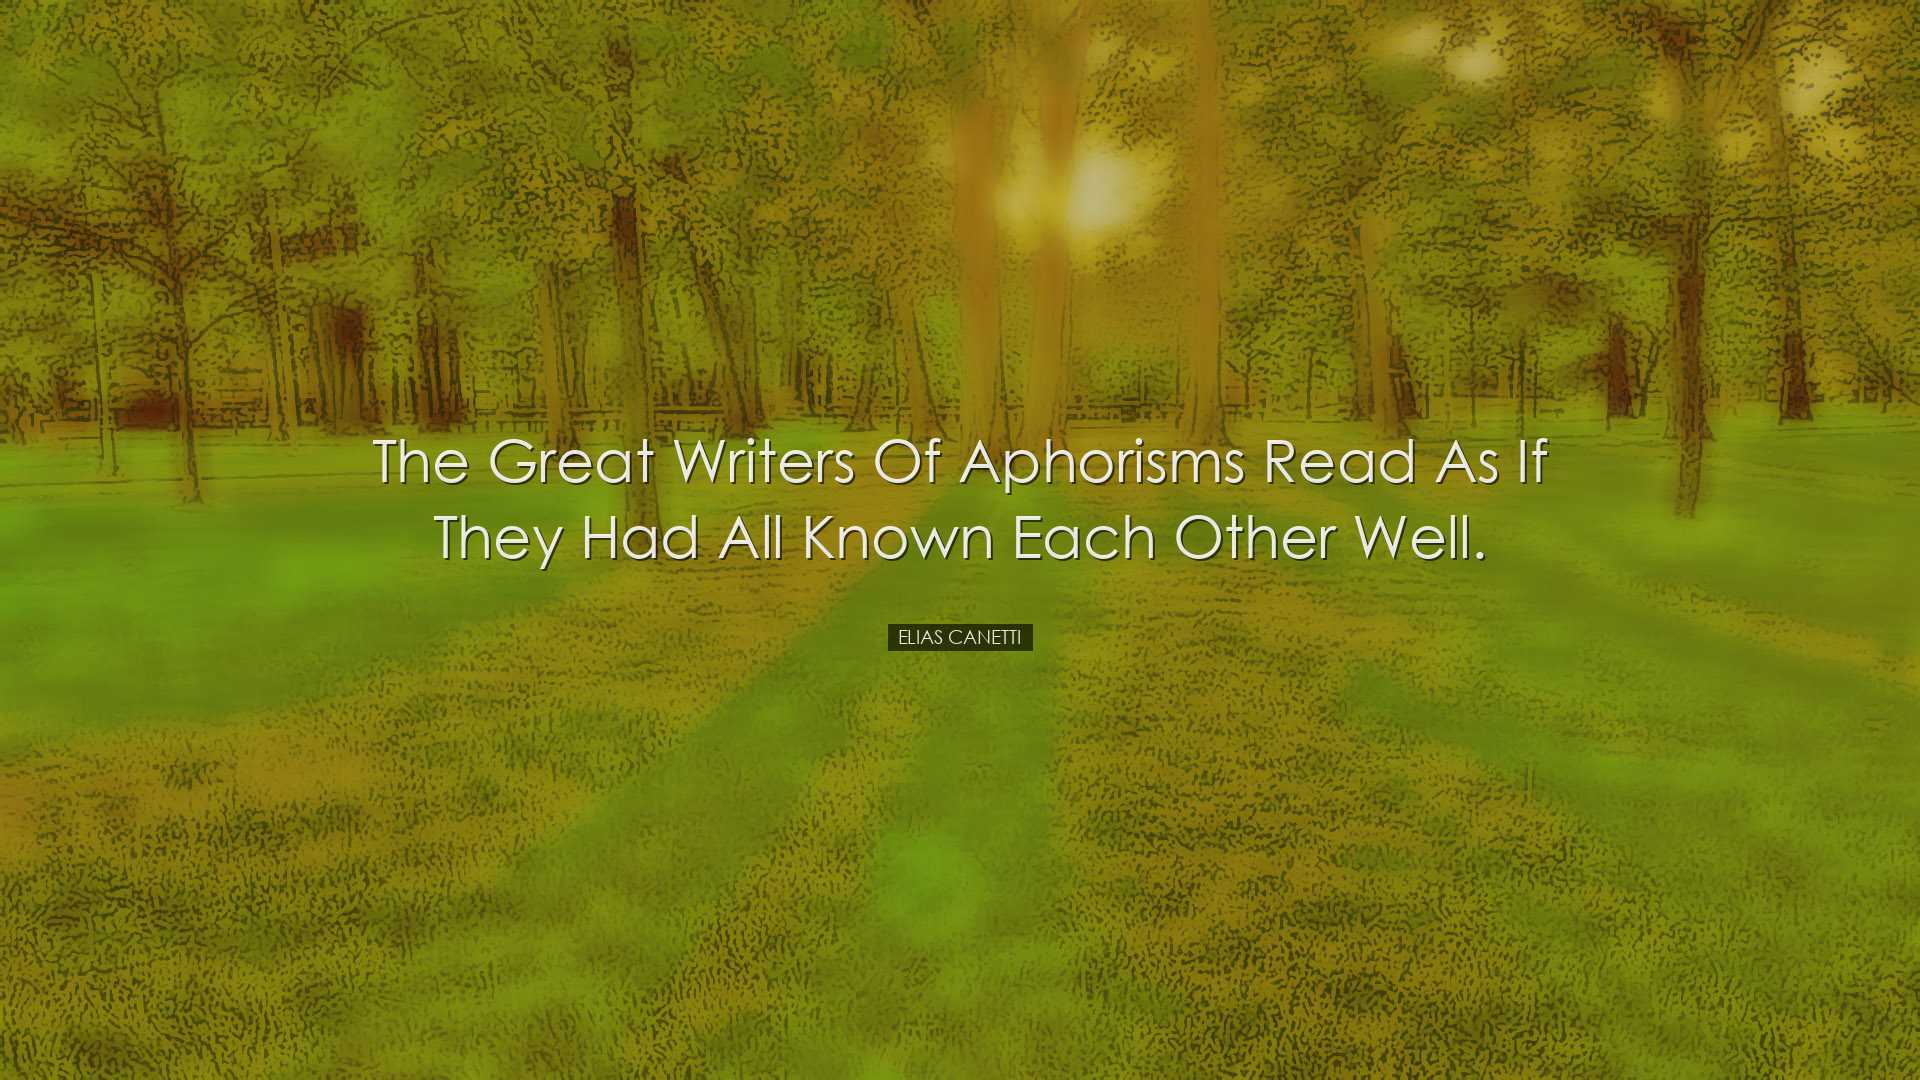 The great writers of aphorisms read as if they had all known each